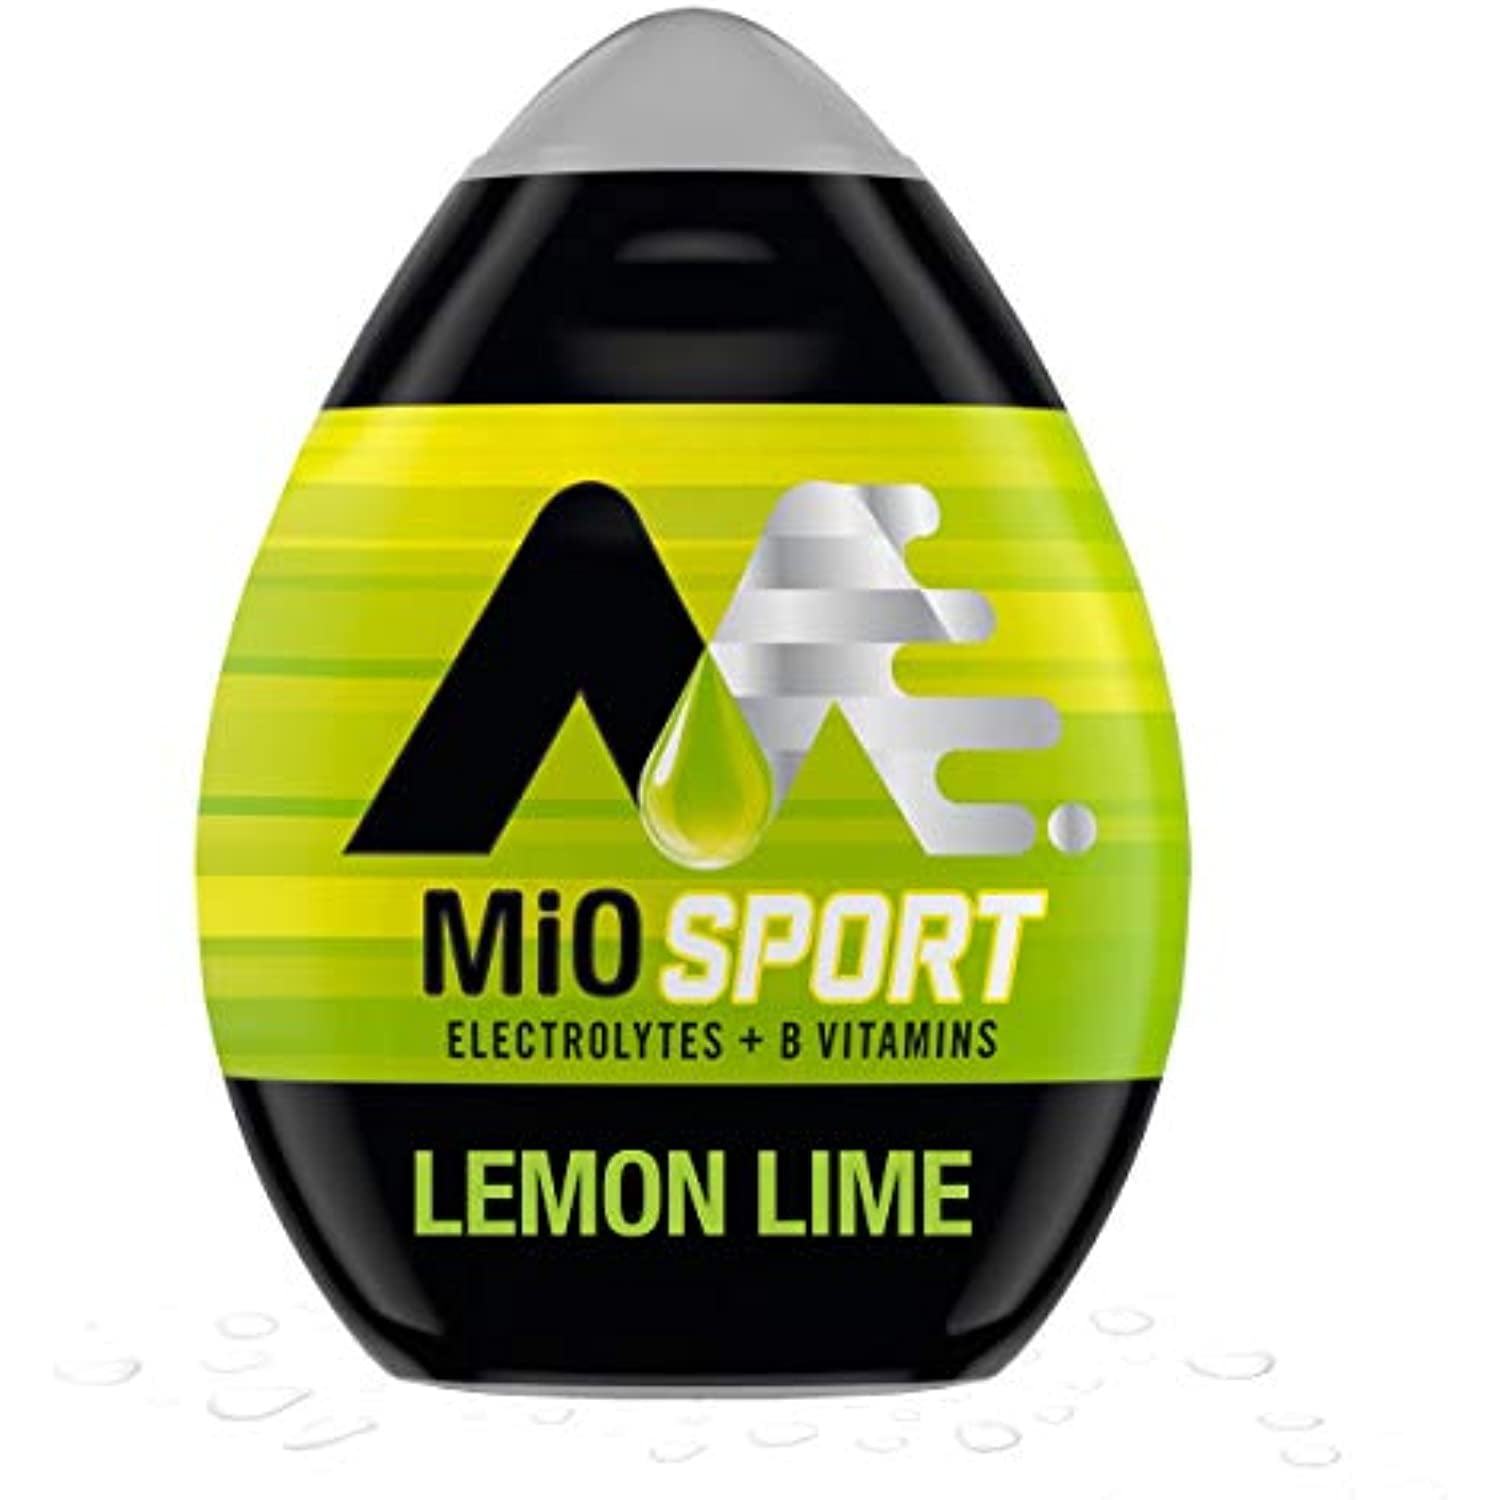 Mio Sport Lemon Lime Naturally Flavored Liquid Water Enhancer With Electrolytes and B Vitamins, 1.62 Fl Oz Bottle